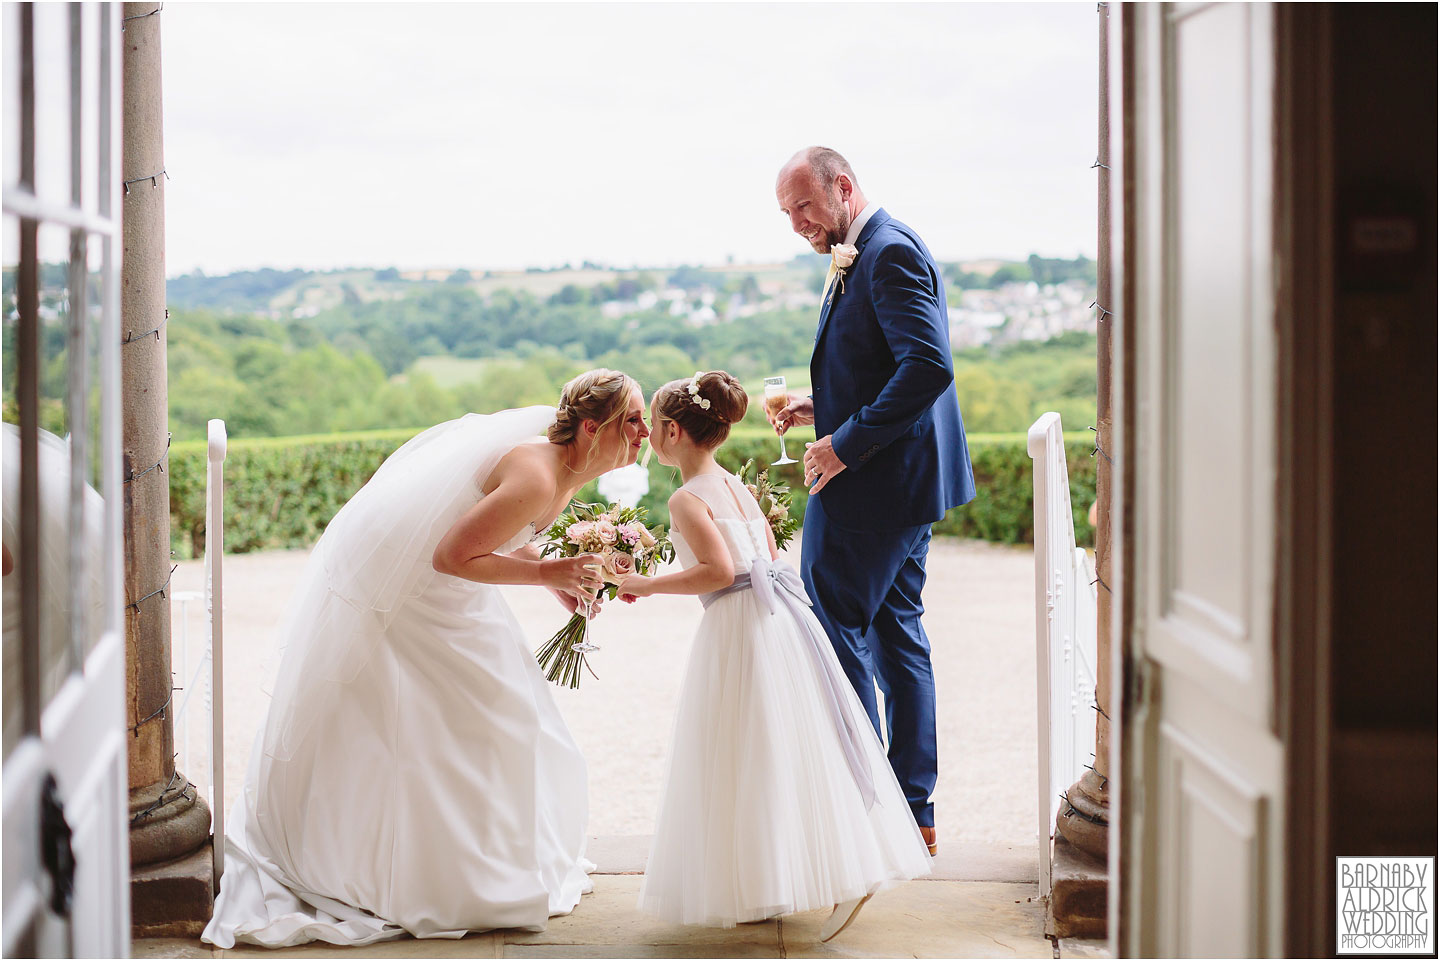 A moment between mum and daughter at a wedding at Wood Hall near Wetherby, Amazing Yorkshire Wedding Photos, Best Yorkshire Wedding Photos 2018